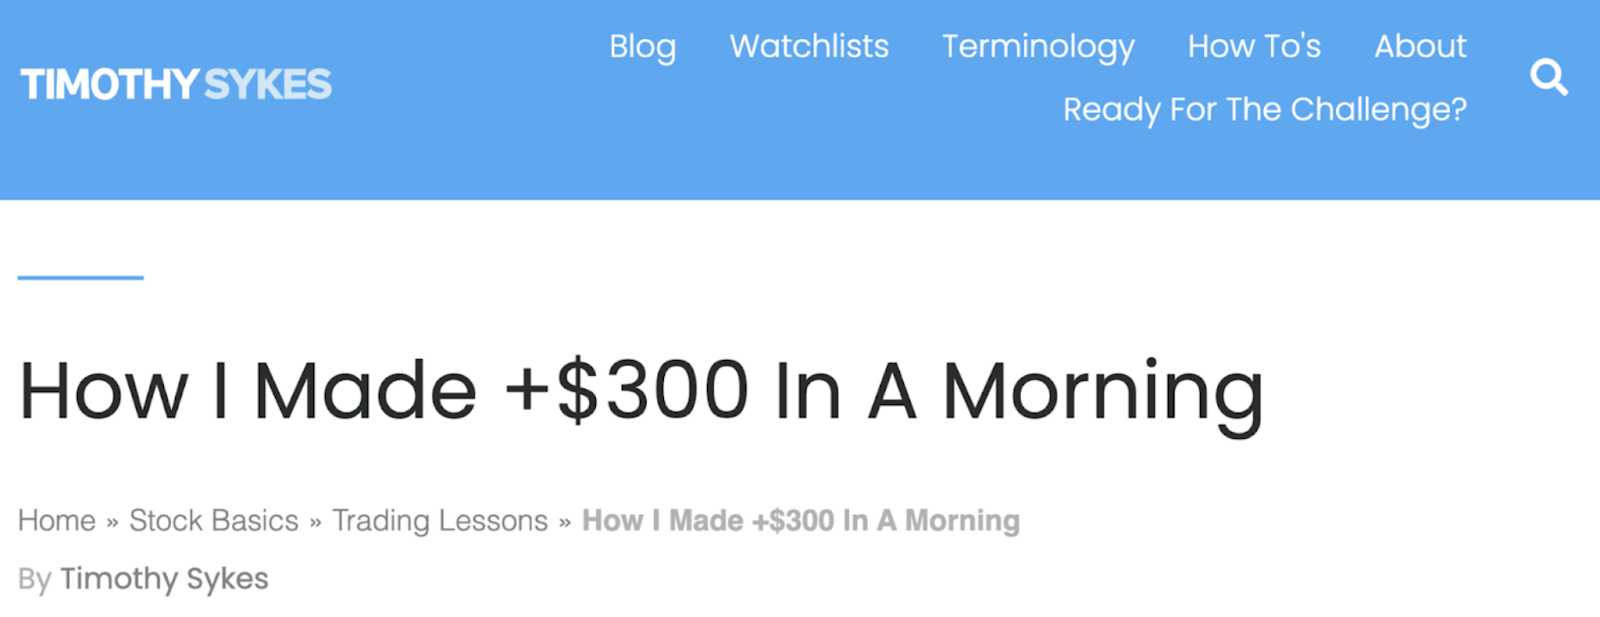 "How I Made $300+ In A Morning" article title